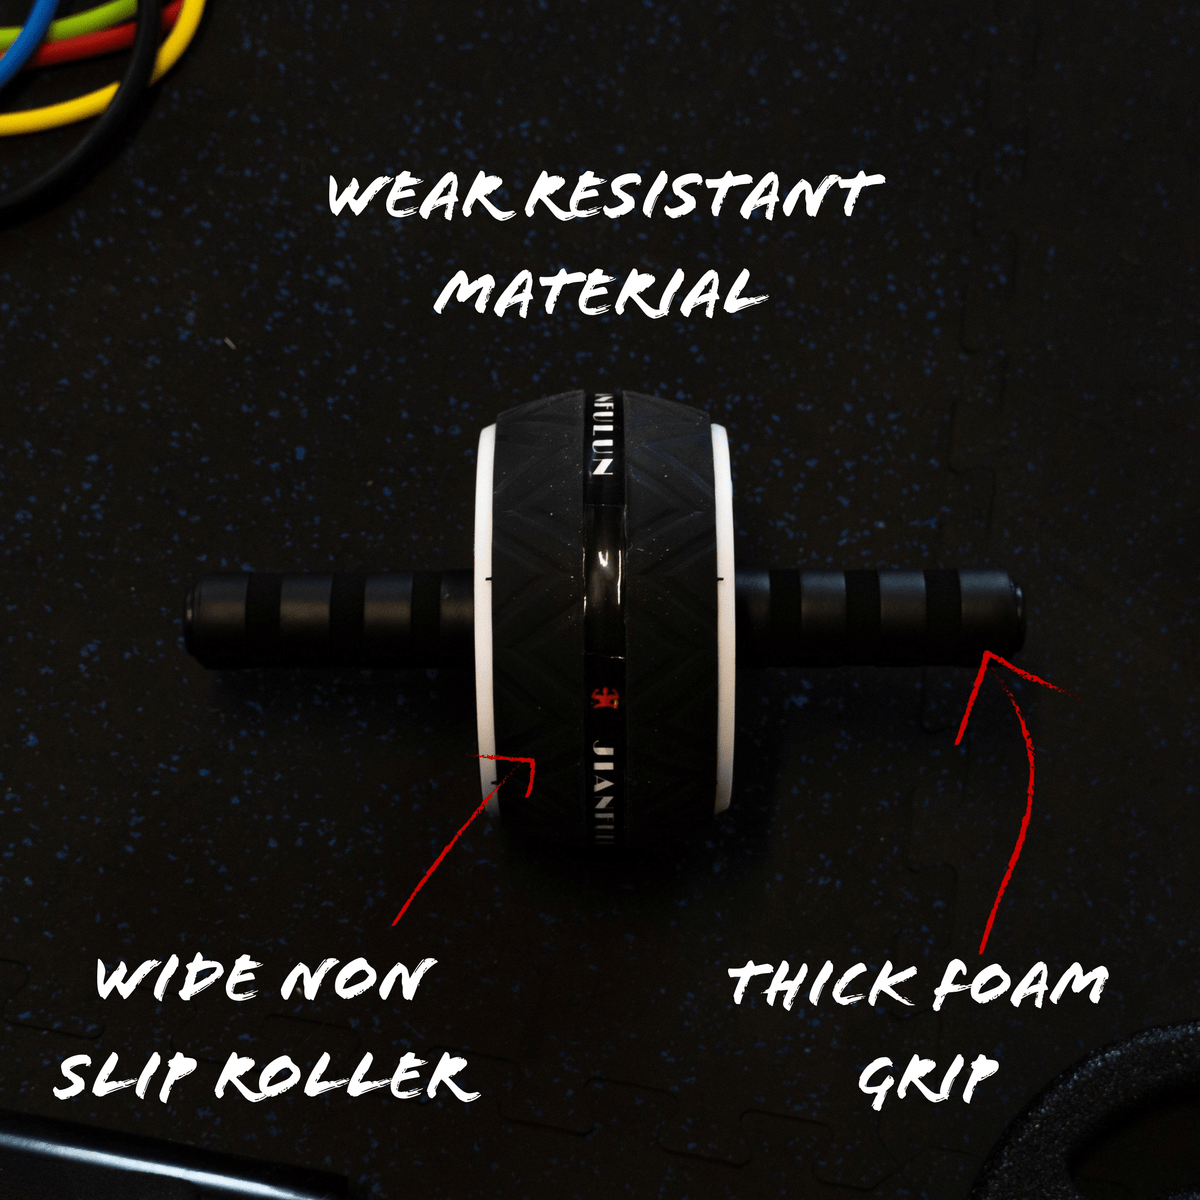 The Abdominal wheel in training gym has thick foam grip and a wide non-slip roller. 